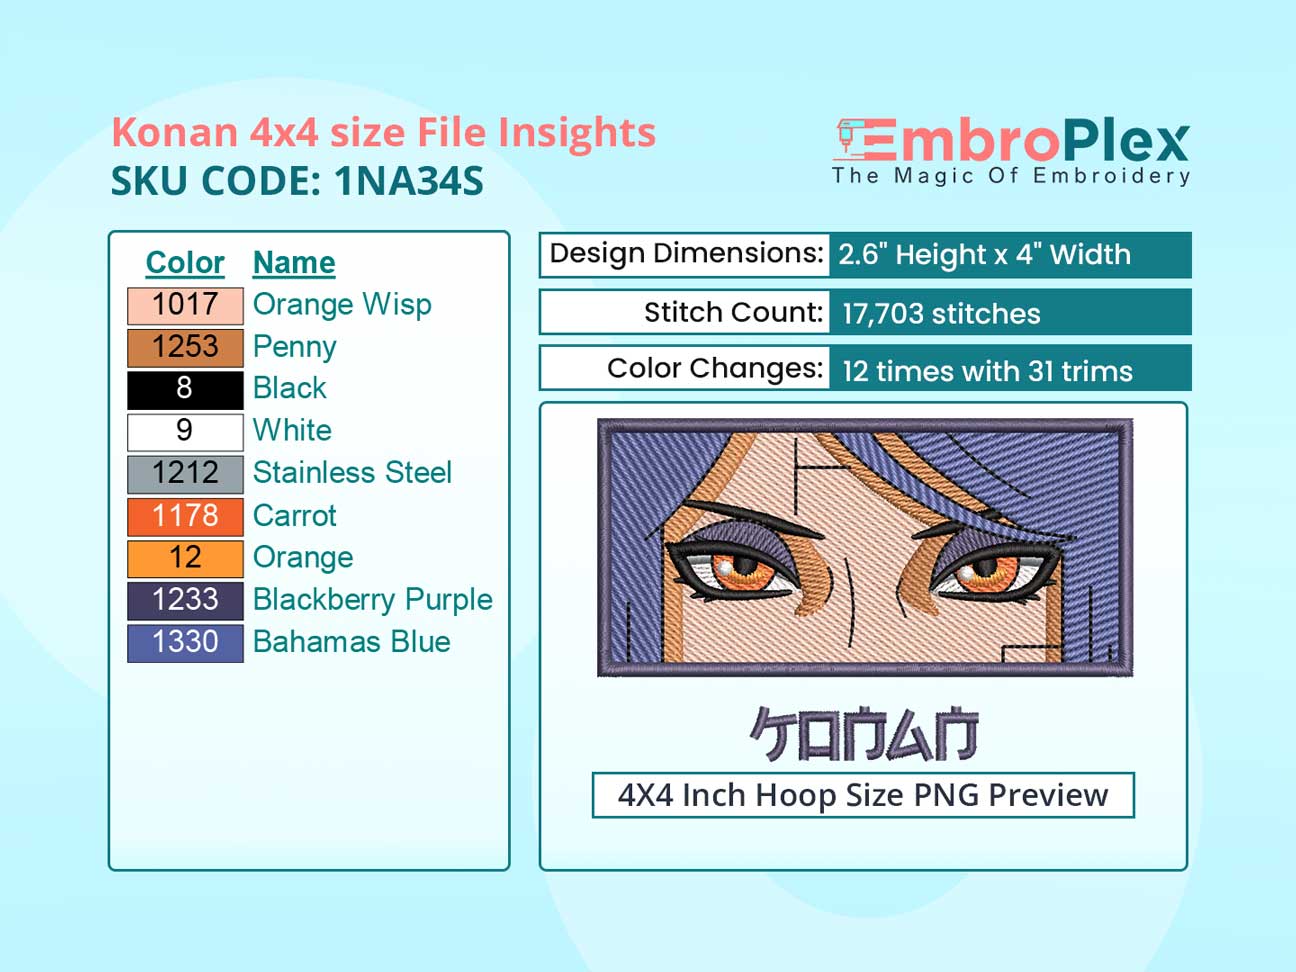 Anime-Inspired Konan Embroidery Design File - 4x4 Inch hoop Size Variation overview image